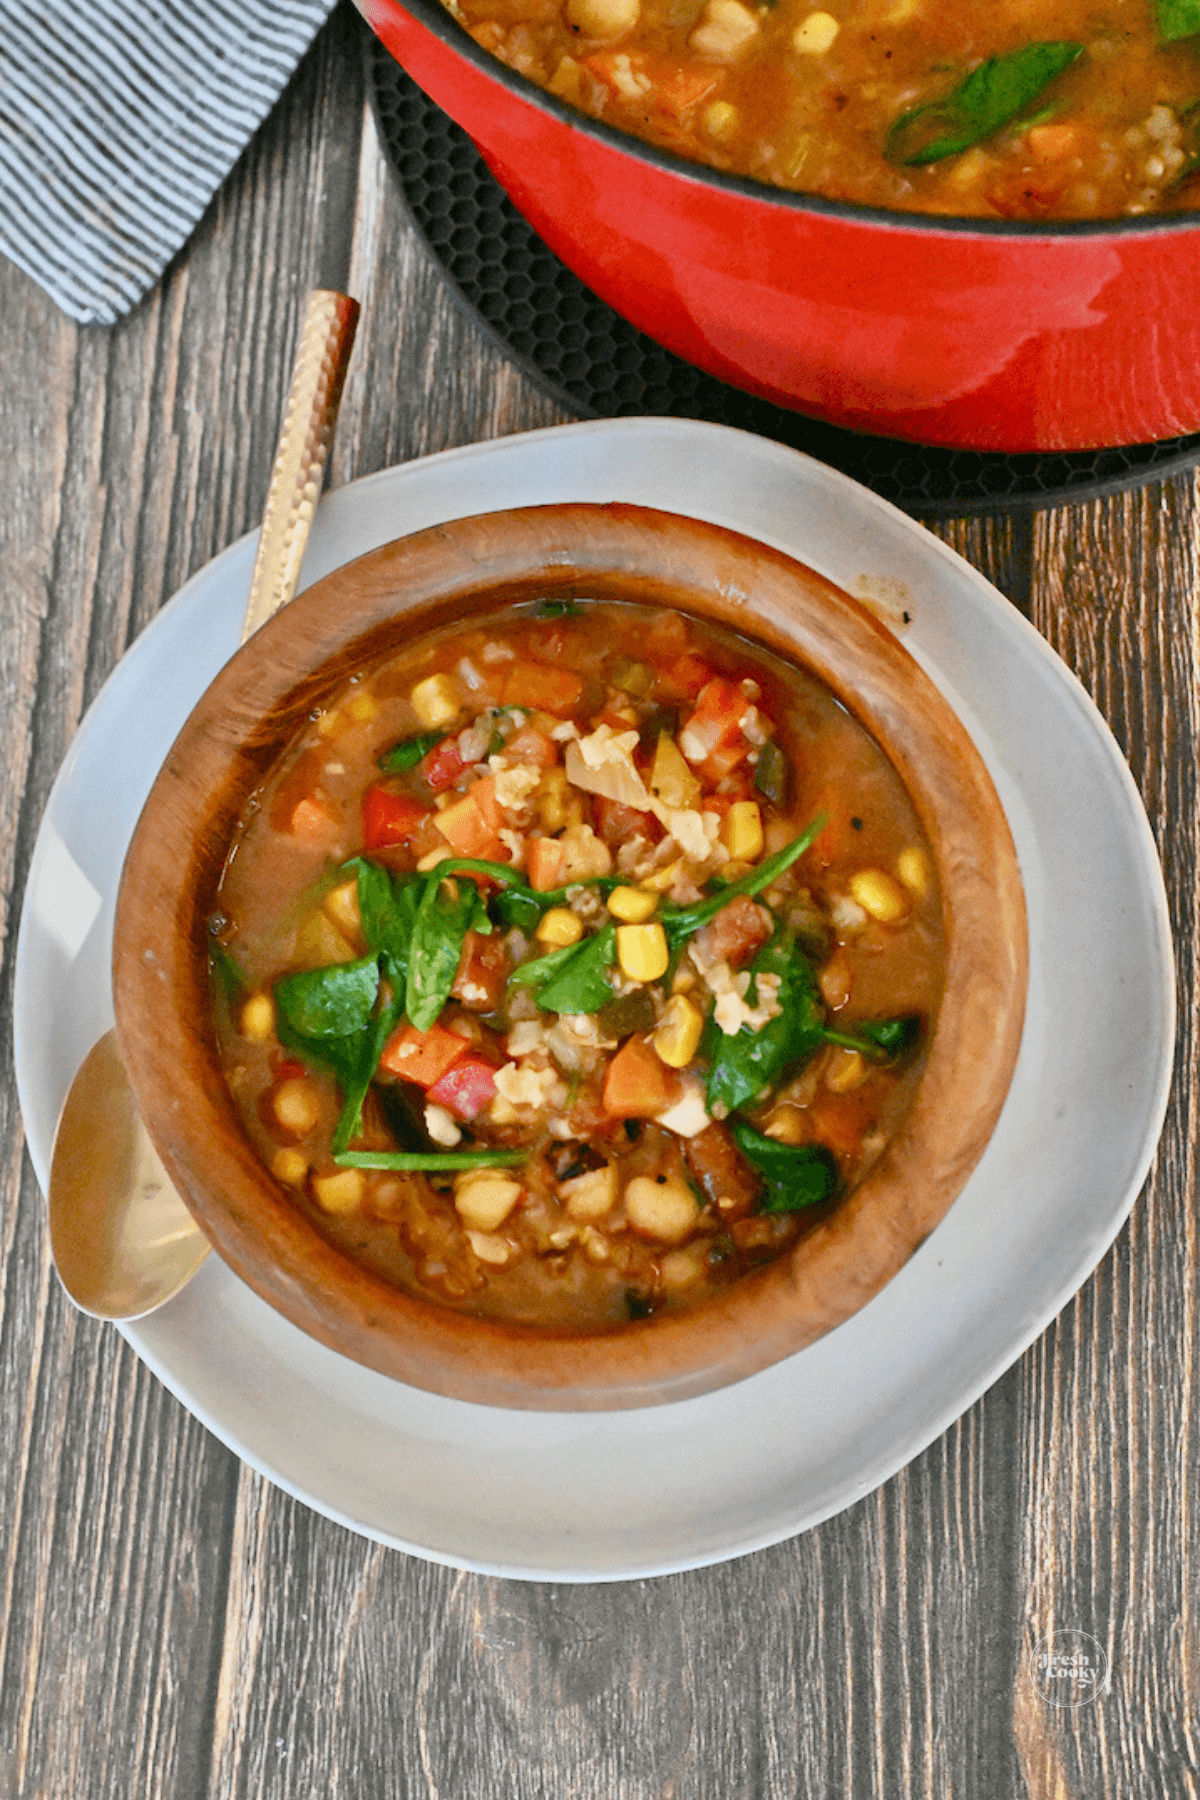 https://www.thefreshcooky.com/wp-content/uploads/2023/01/Bowl-filled-with-Panera-10-vegetable-soup-recipe-2.png